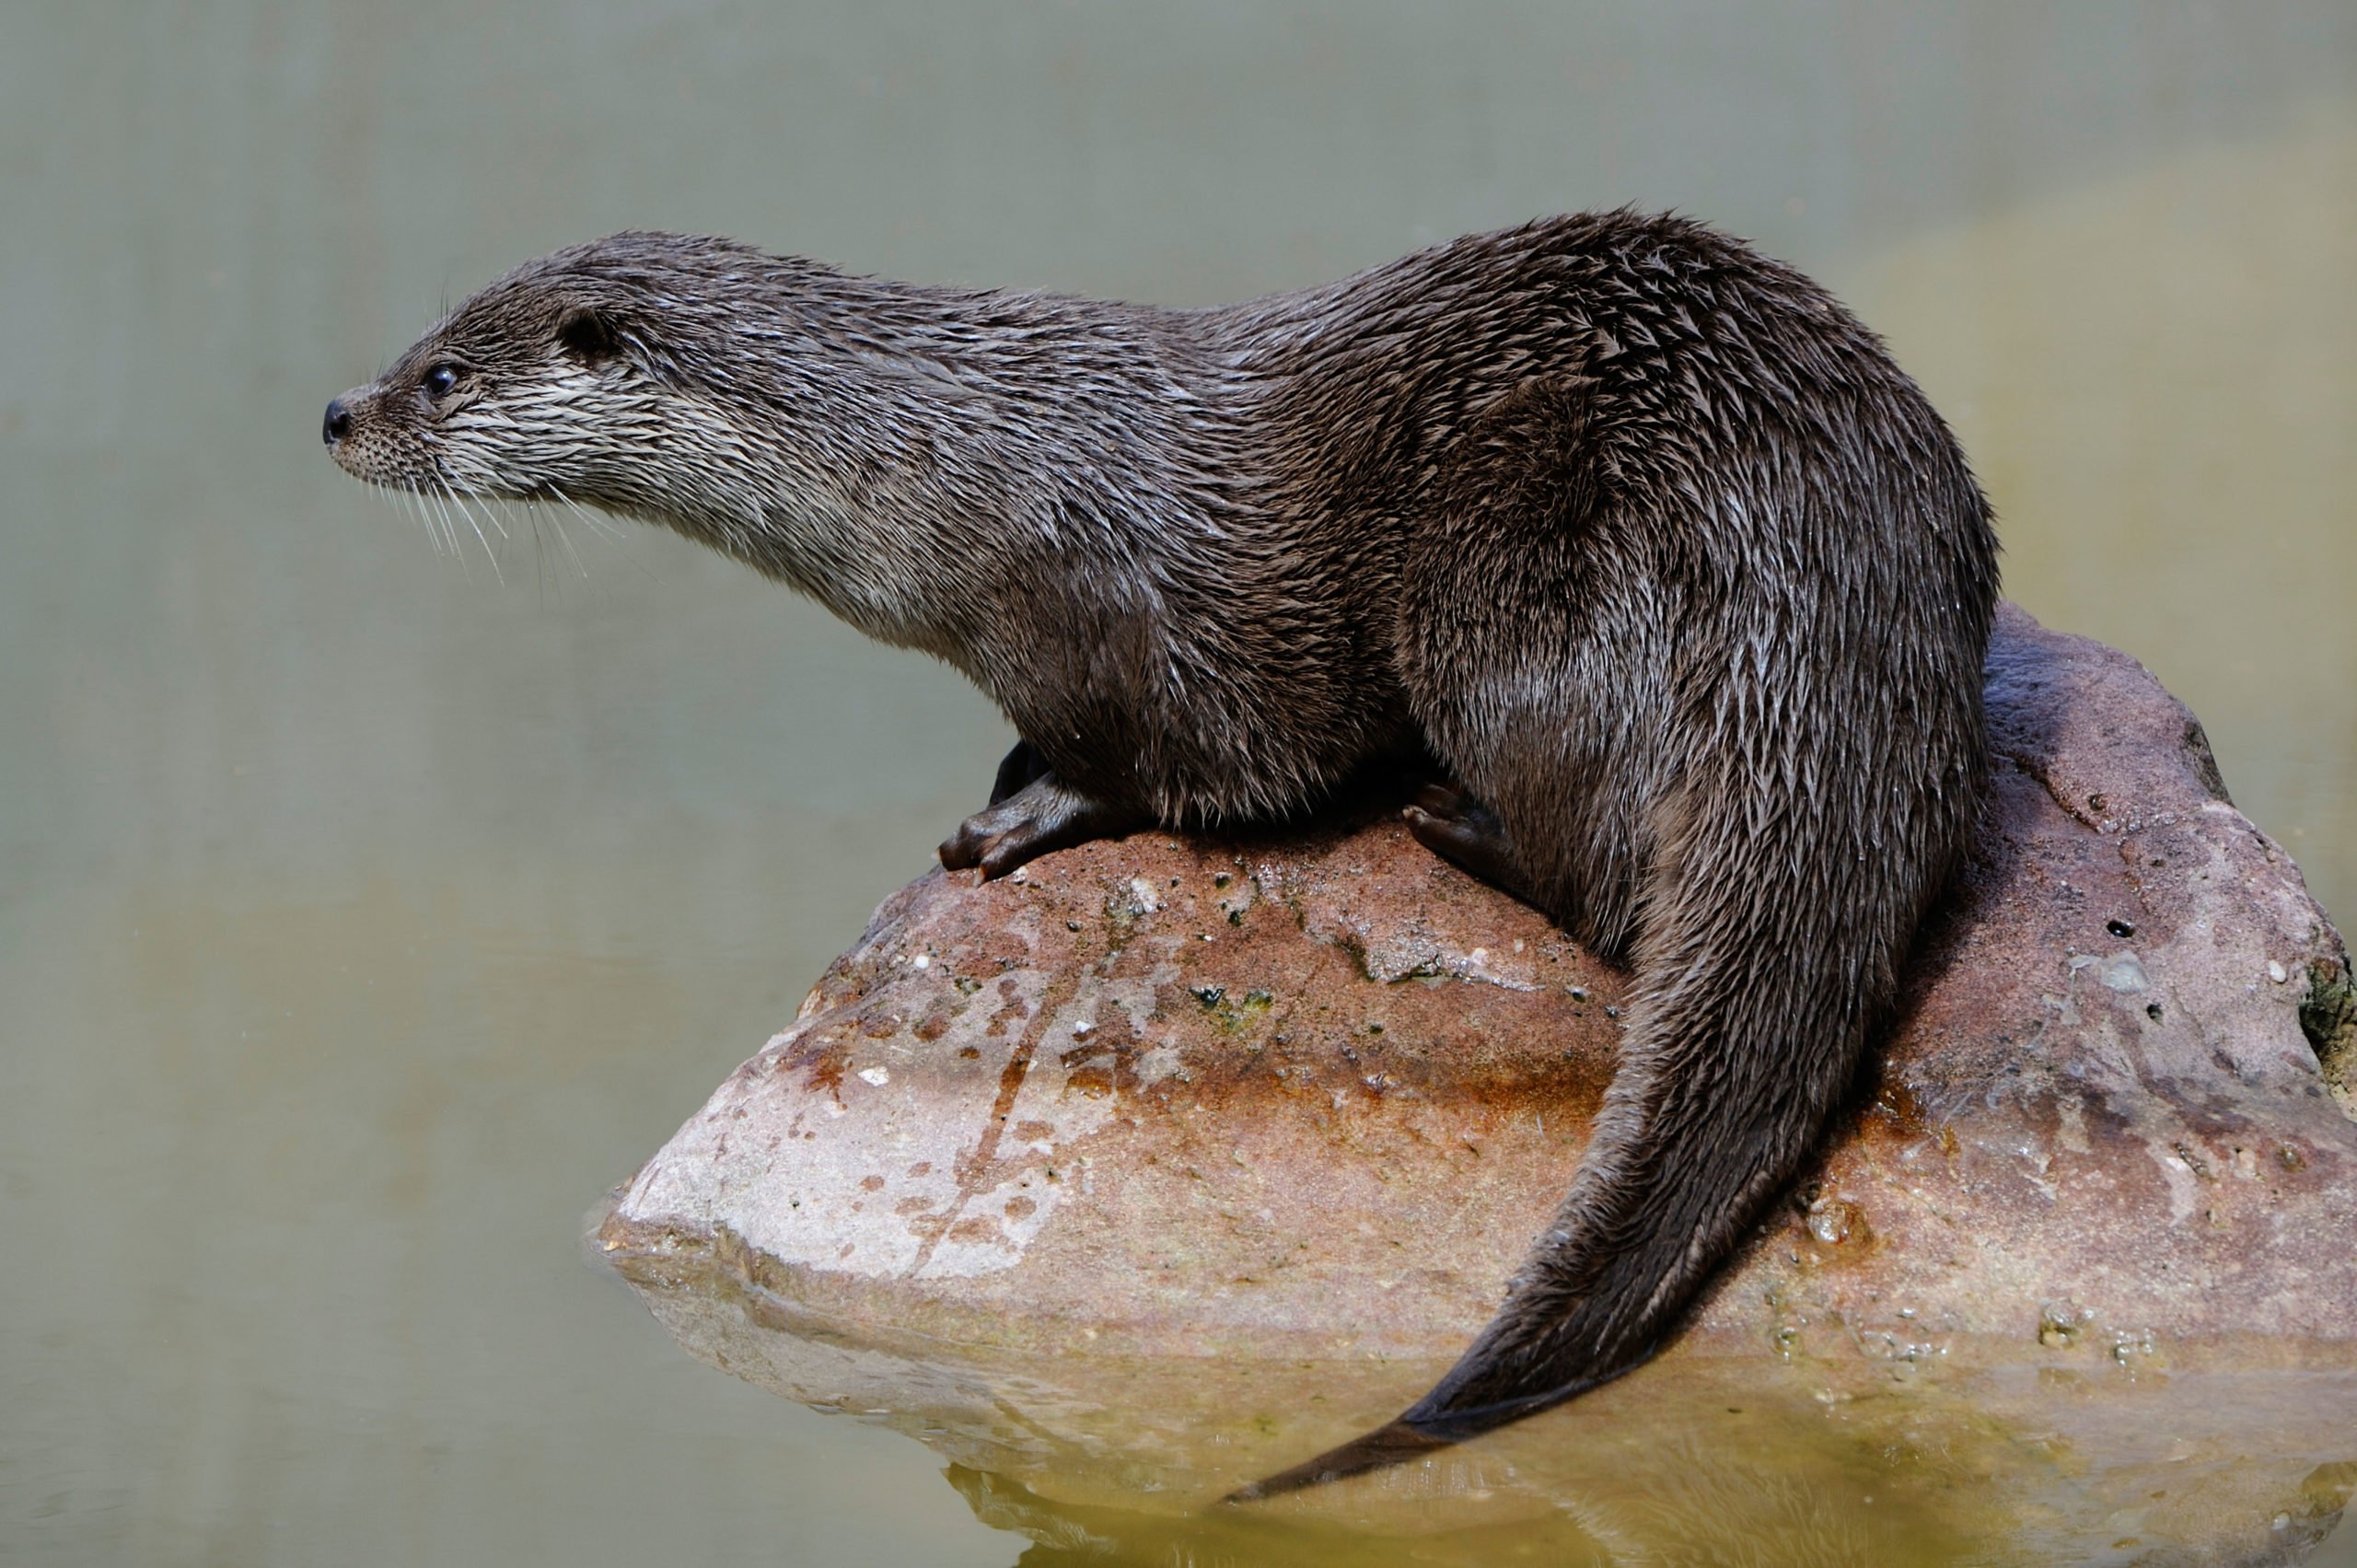 Eurasian otter. The wildlife of northern Thailand, including otters, fish and nesting birds, is facing threats from dams on the Mekong.